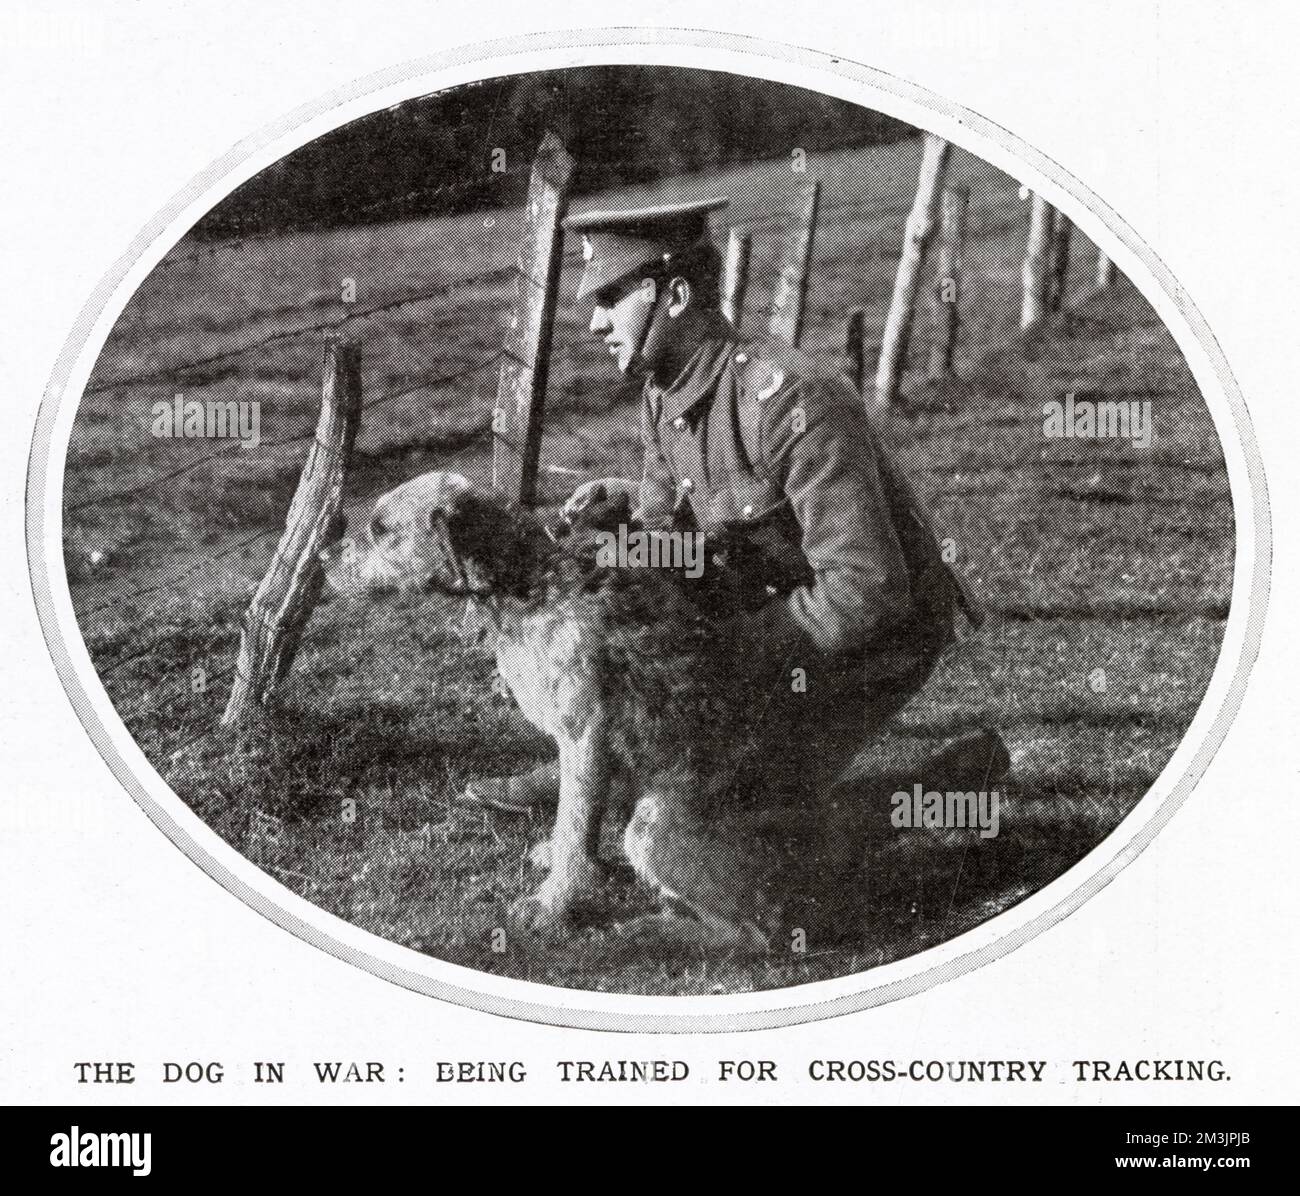 A British war-dog being trained for cross-country work. Dogs were used frequently, particularly by the Germans, during World War I, as auxiliaries in ambulance work, and for sentry and patrol work. Stock Photo